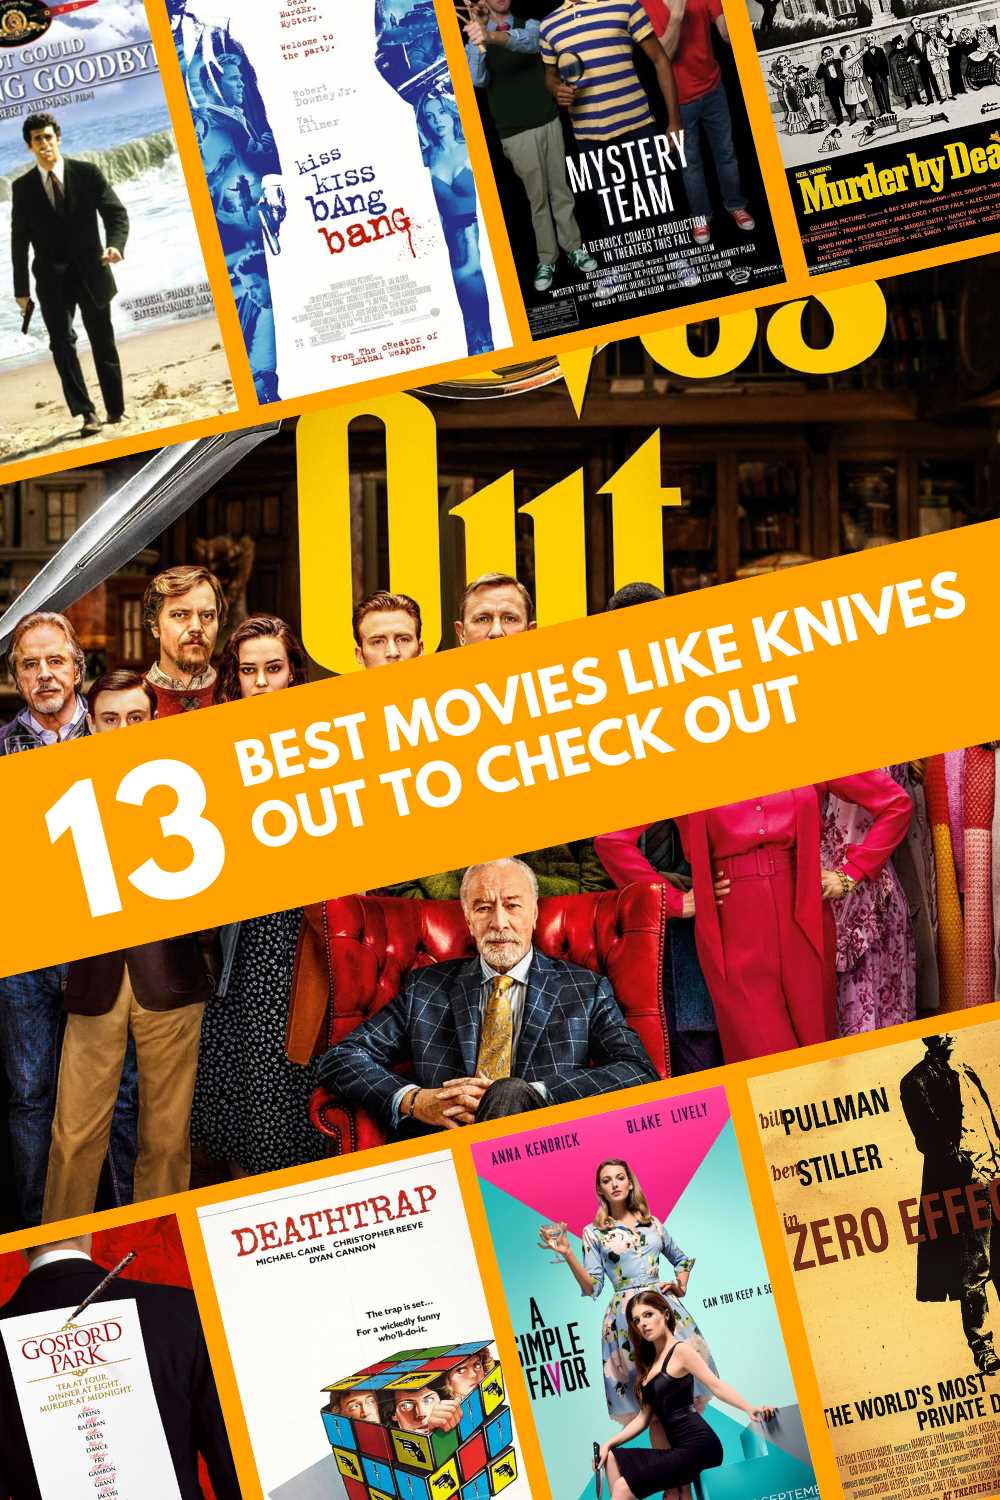 Movies Like Knives Out to Check Out